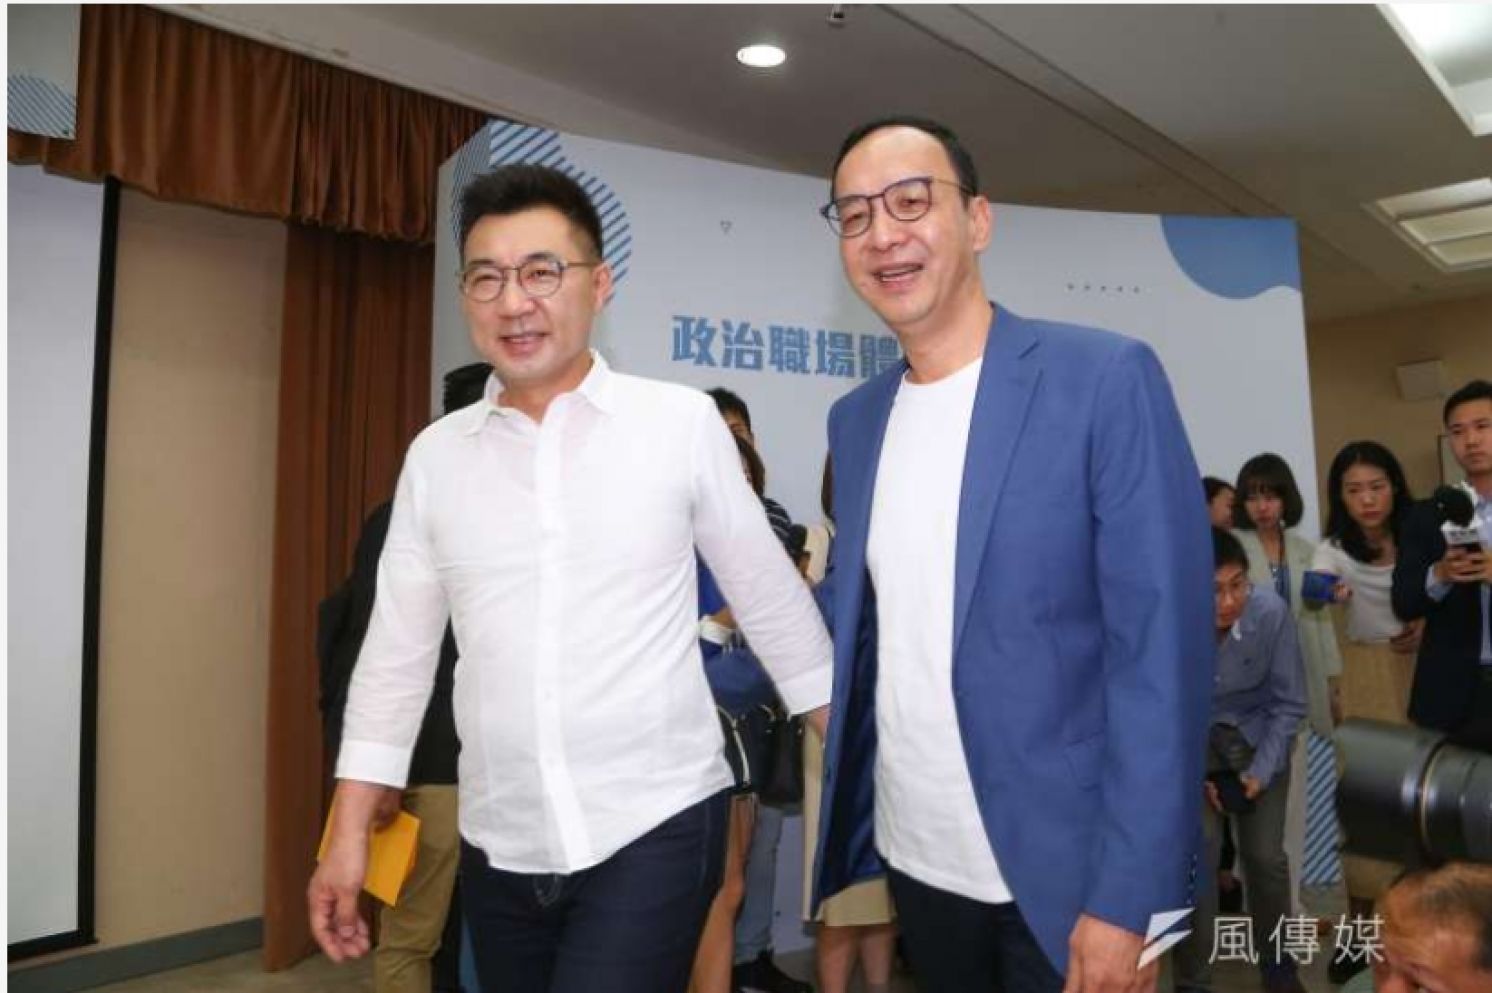 Who Can Lead Kuomintang Out of Four Predicaments： Eric Chu or Johnny Chiang？